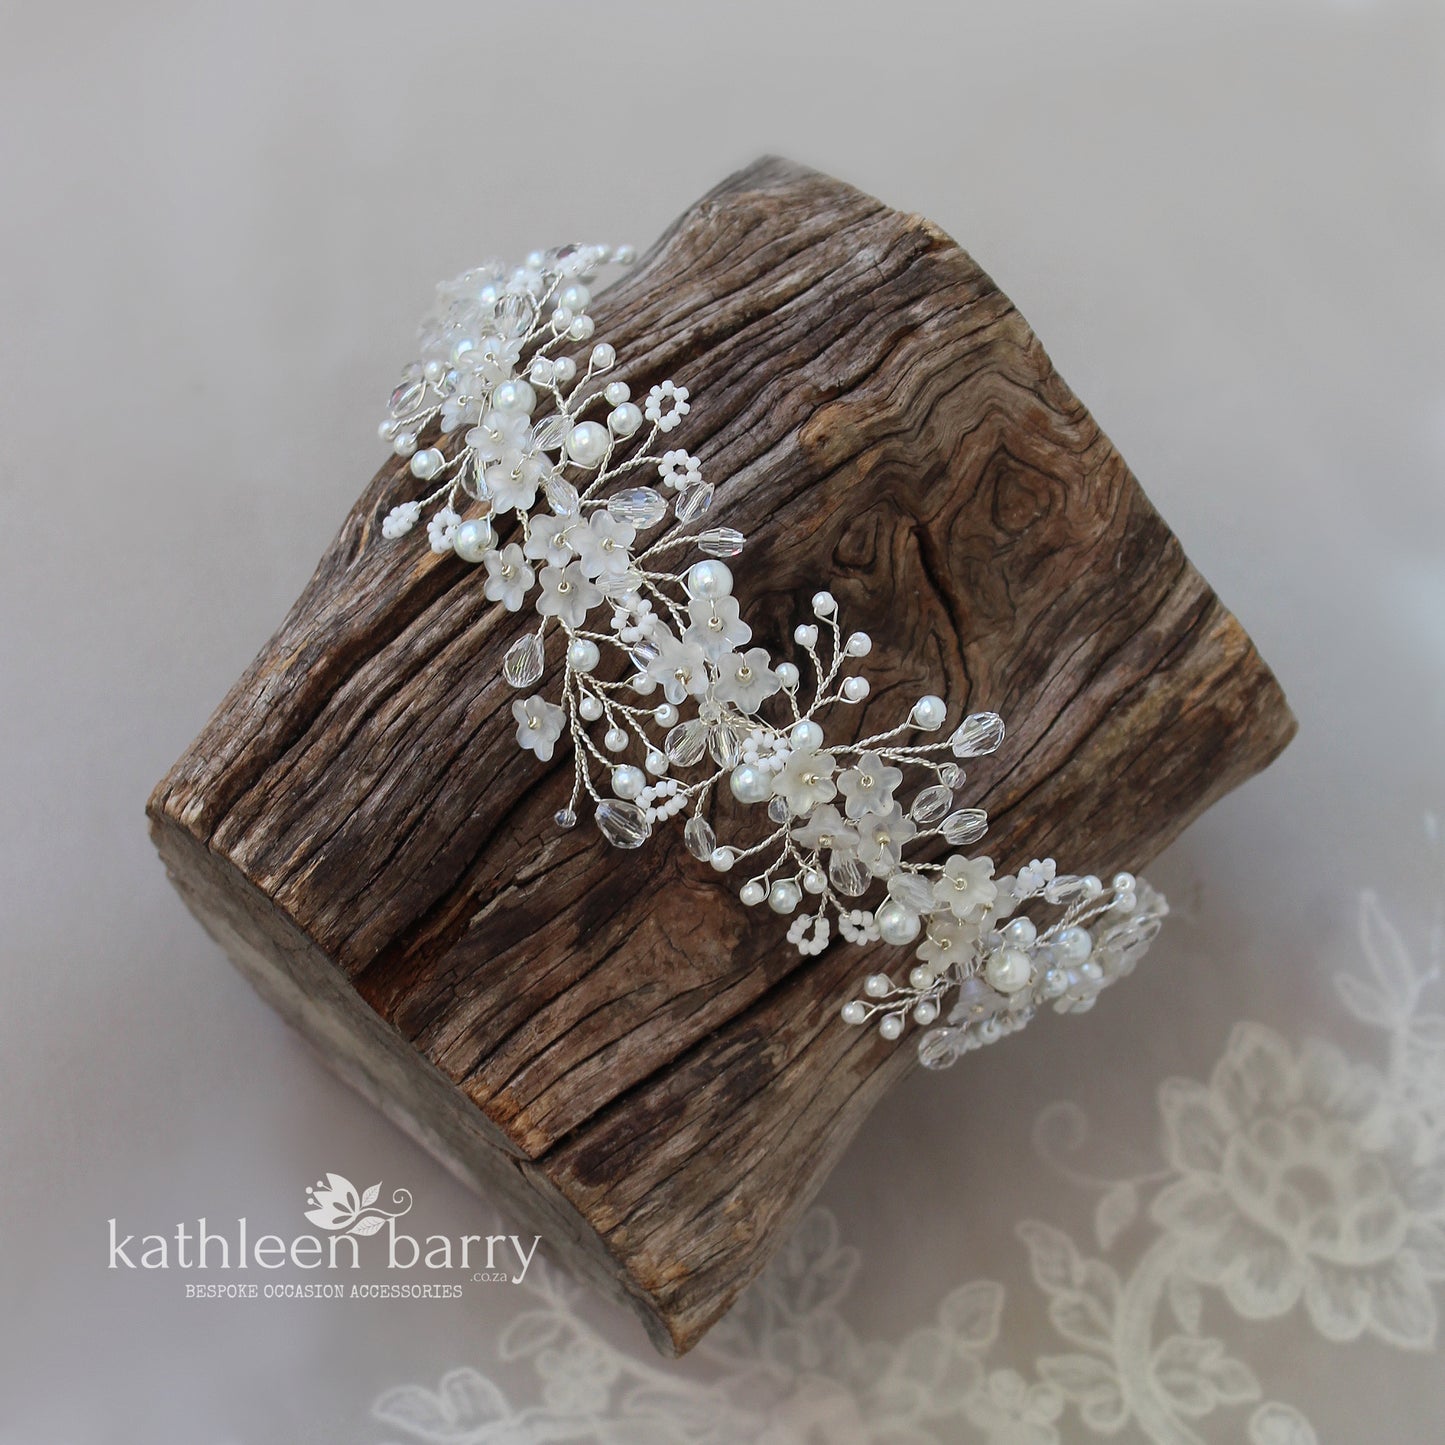 Ira delicate flower wedding headband - Assorted colors available - Finish options: Silver, gold or rose gold